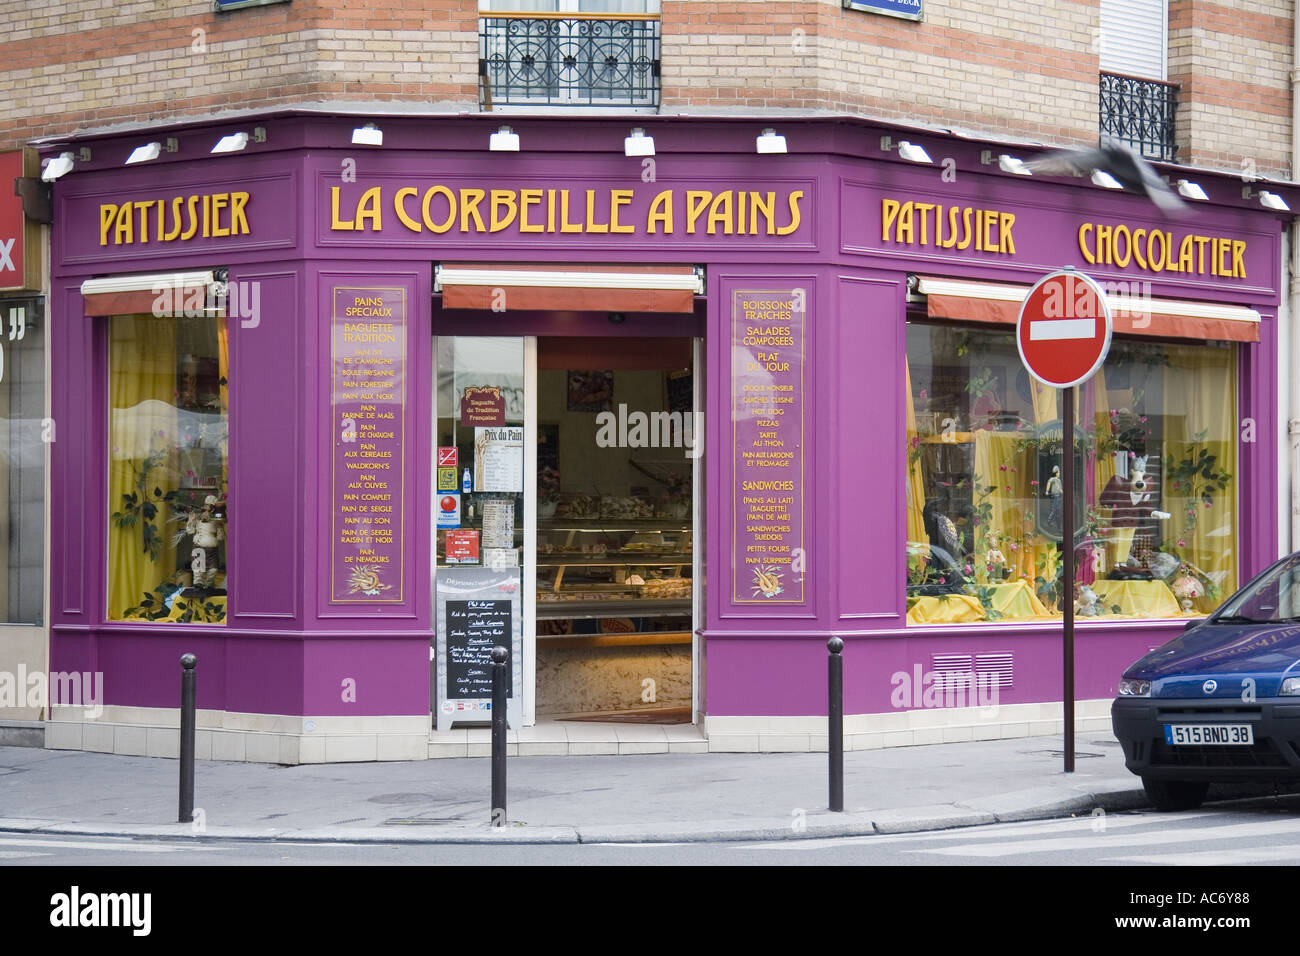 La Corbeille A Pains bakery or patissier and chocolatier on Rue Theodore  Deck Paris France Stock Photo - Alamy